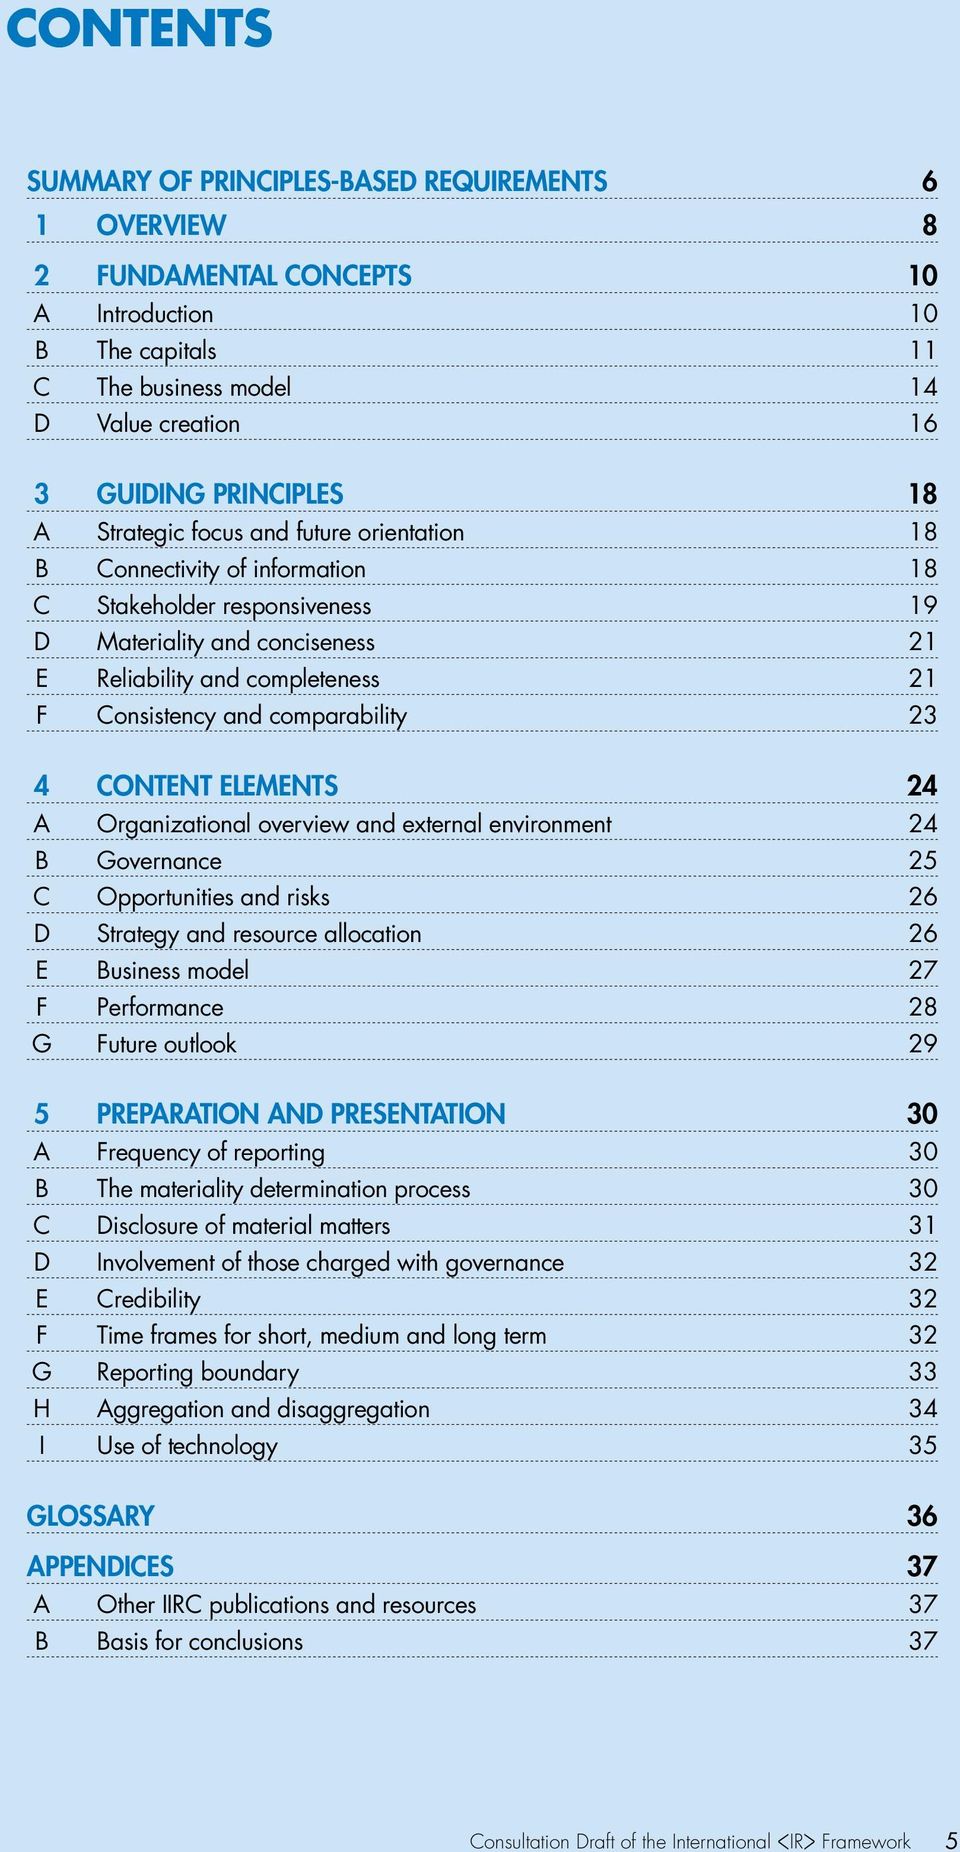 comparability 23 4 CONTENT ELEMENTS 24 A Organizational overview and external environment 24 B Governance 25 C Opportunities and risks 26 D Strategy and resource allocation 26 E Business model 27 F